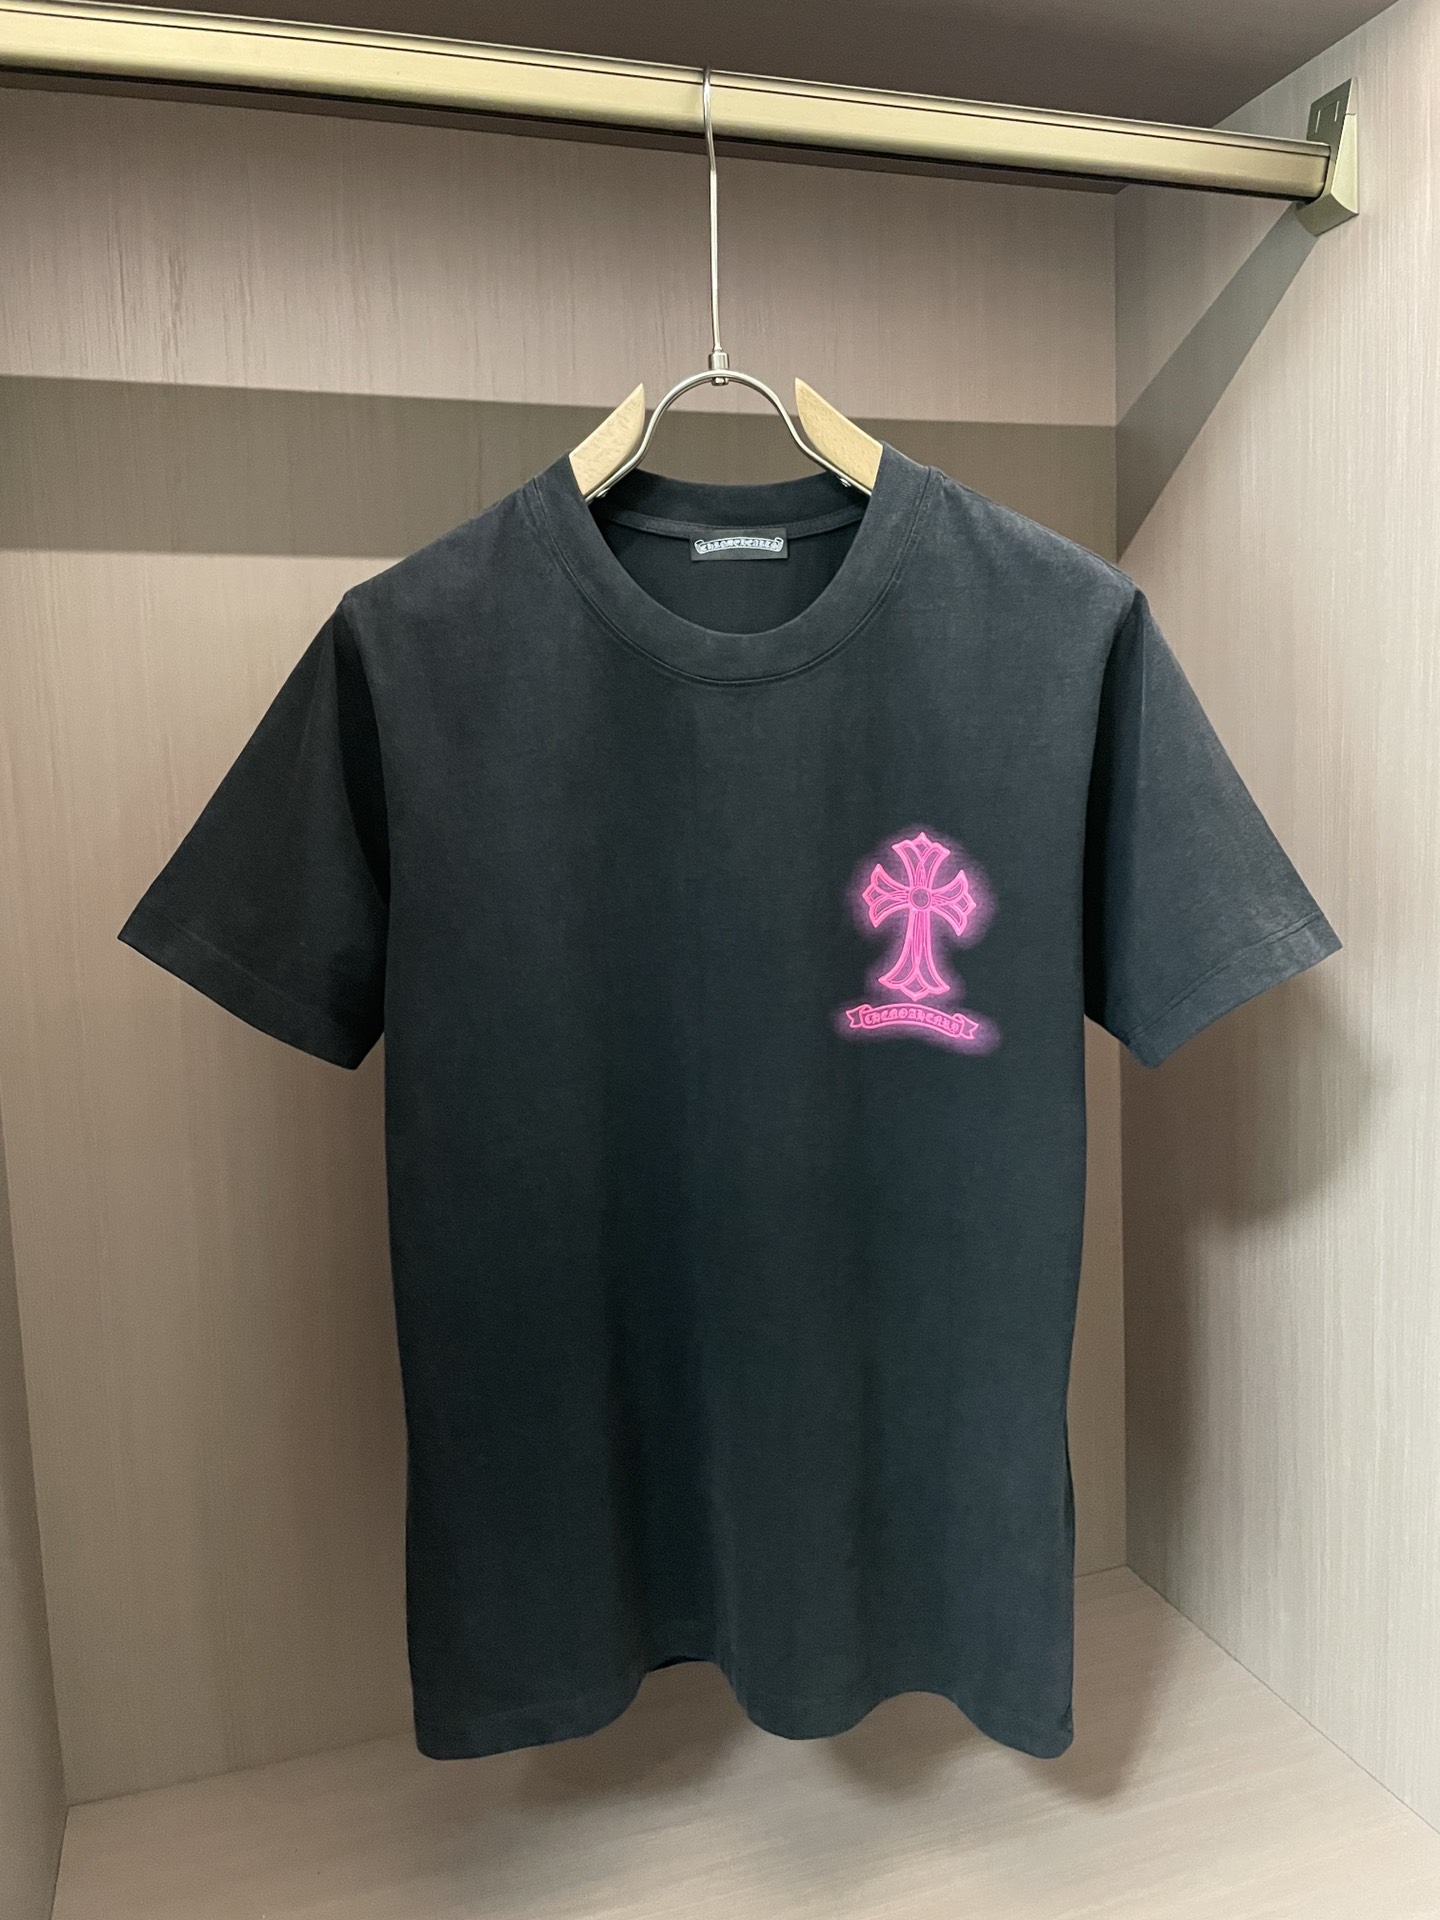 Chrome Hearts Clothing T-Shirt Combed Cotton Summer Collection Short Sleeve